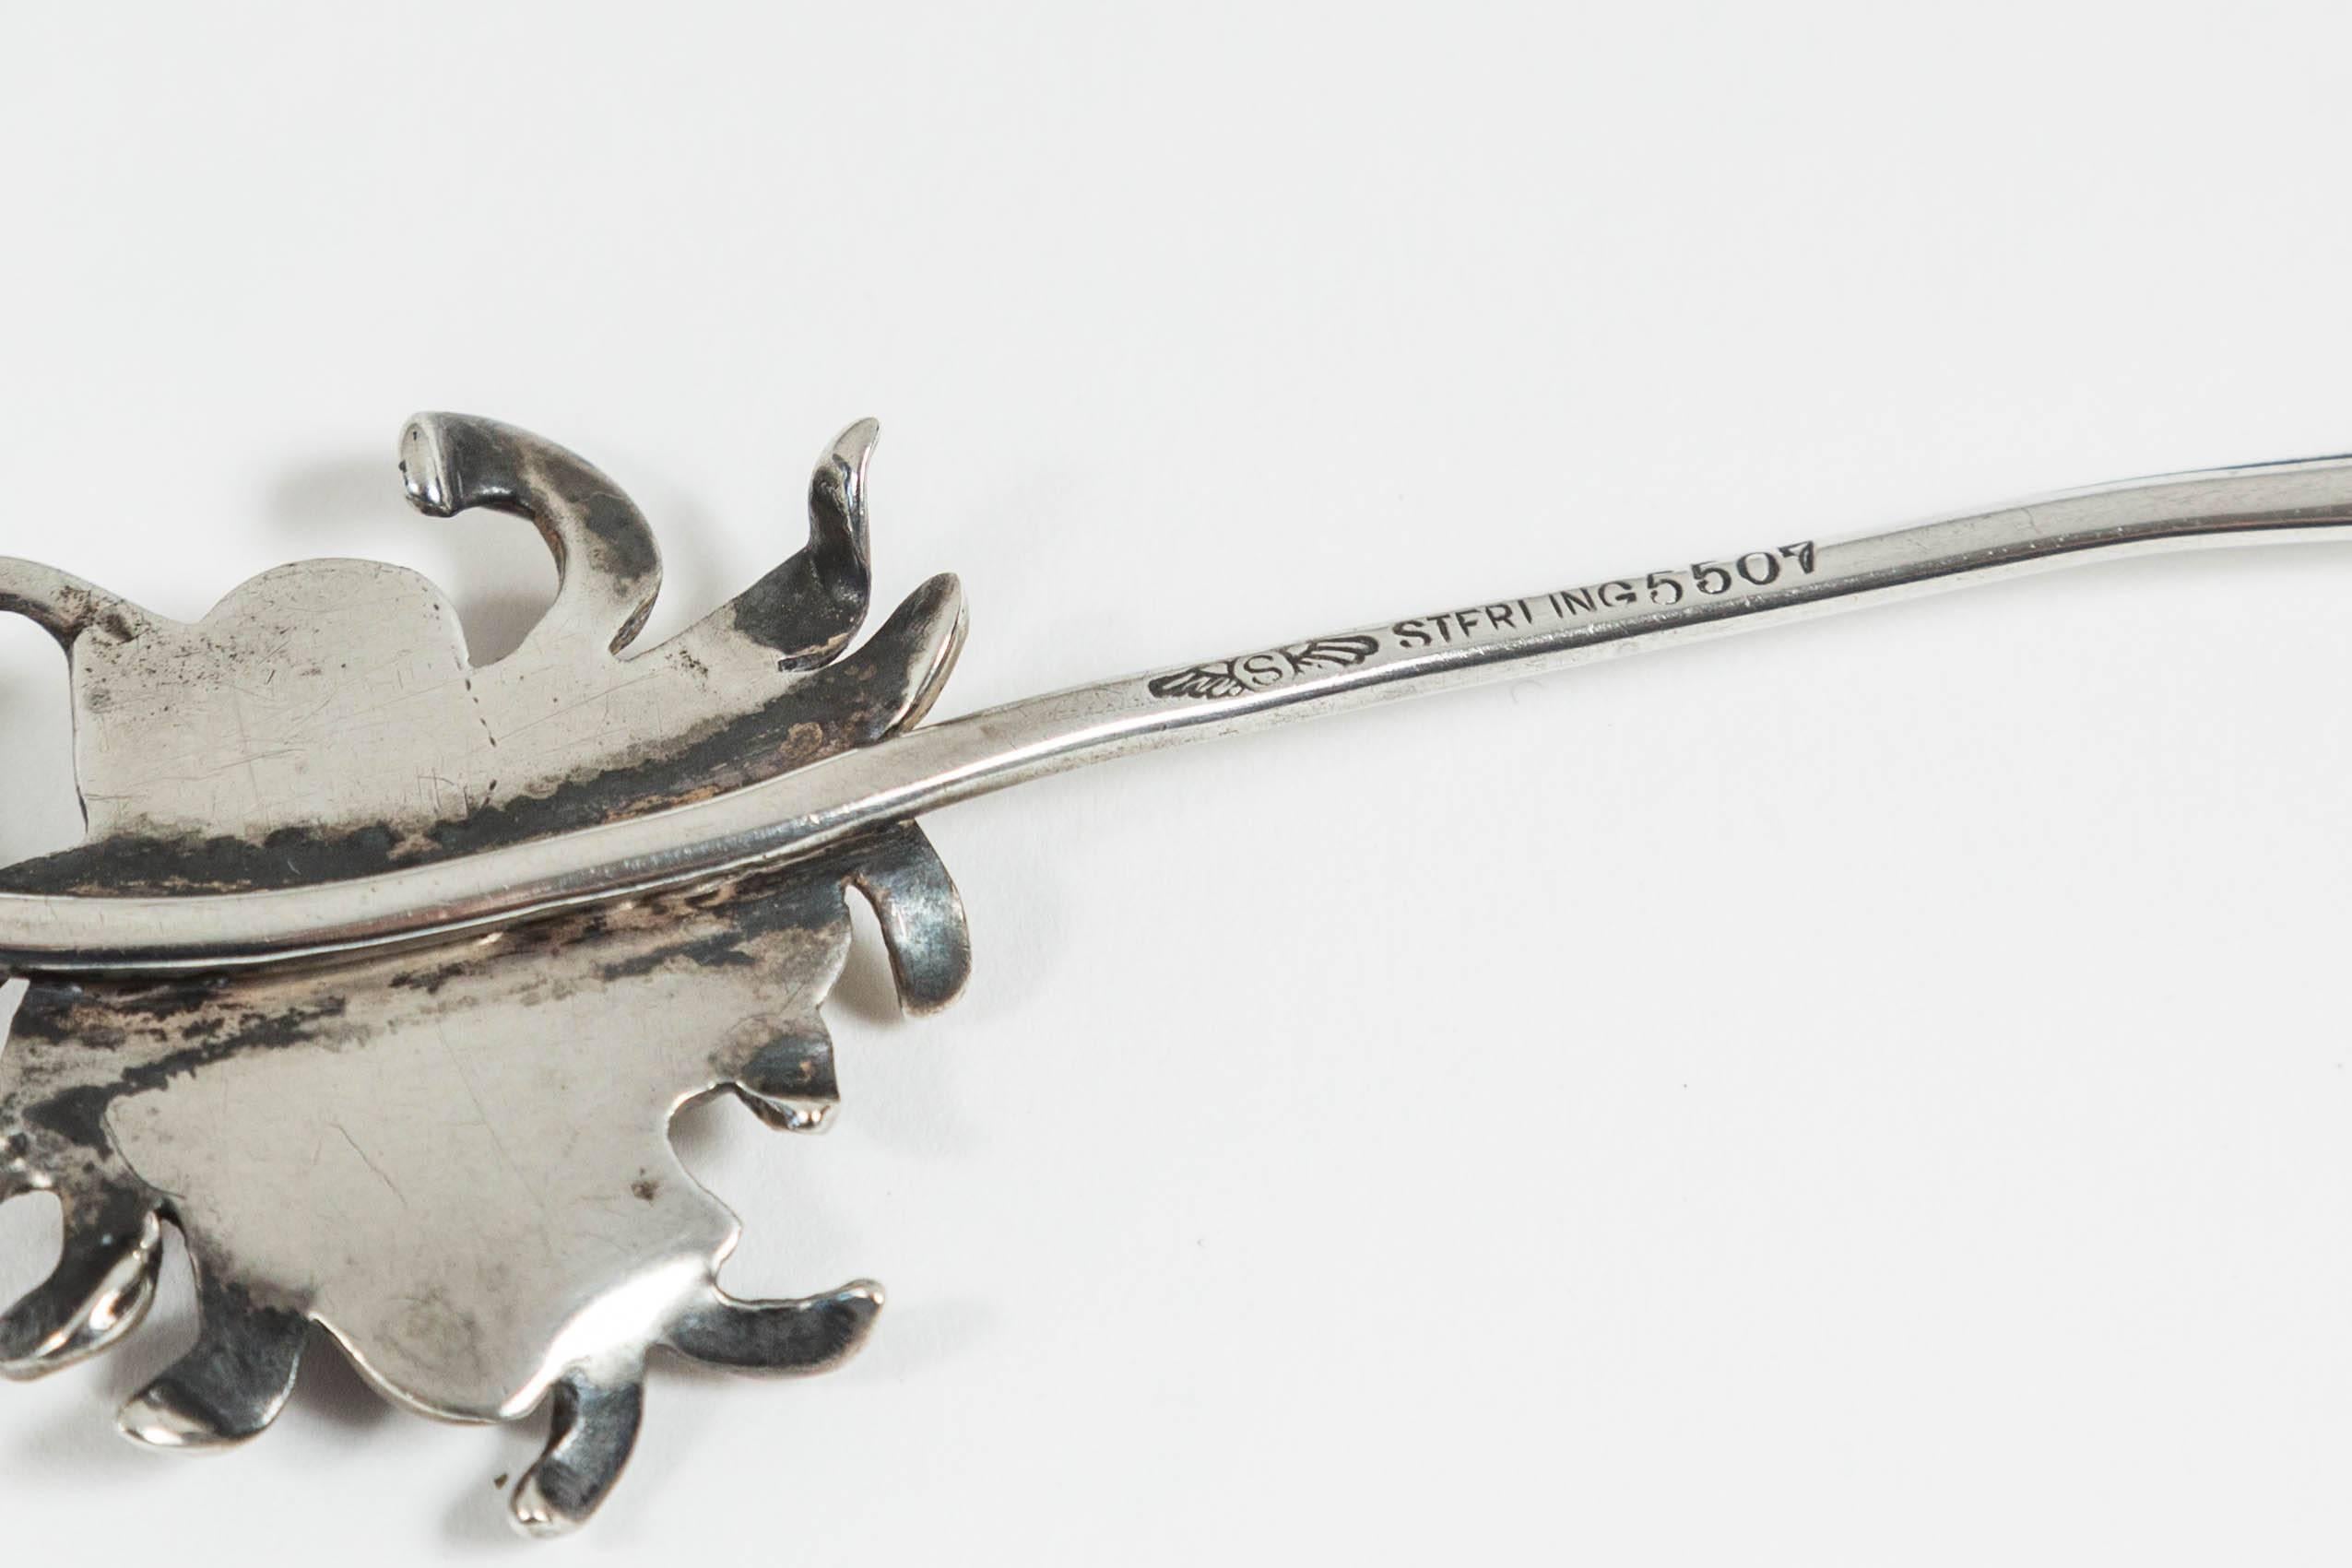 Unusual Art Nouveau chrysanthemum letter opener by American silver maker George W. Shiebler. Sterling silver. With leaf decorated blade and floral decorated handle. Very intricate workmanship. Bears Sheibler's winged s, and Sterling 5507 marks. 7